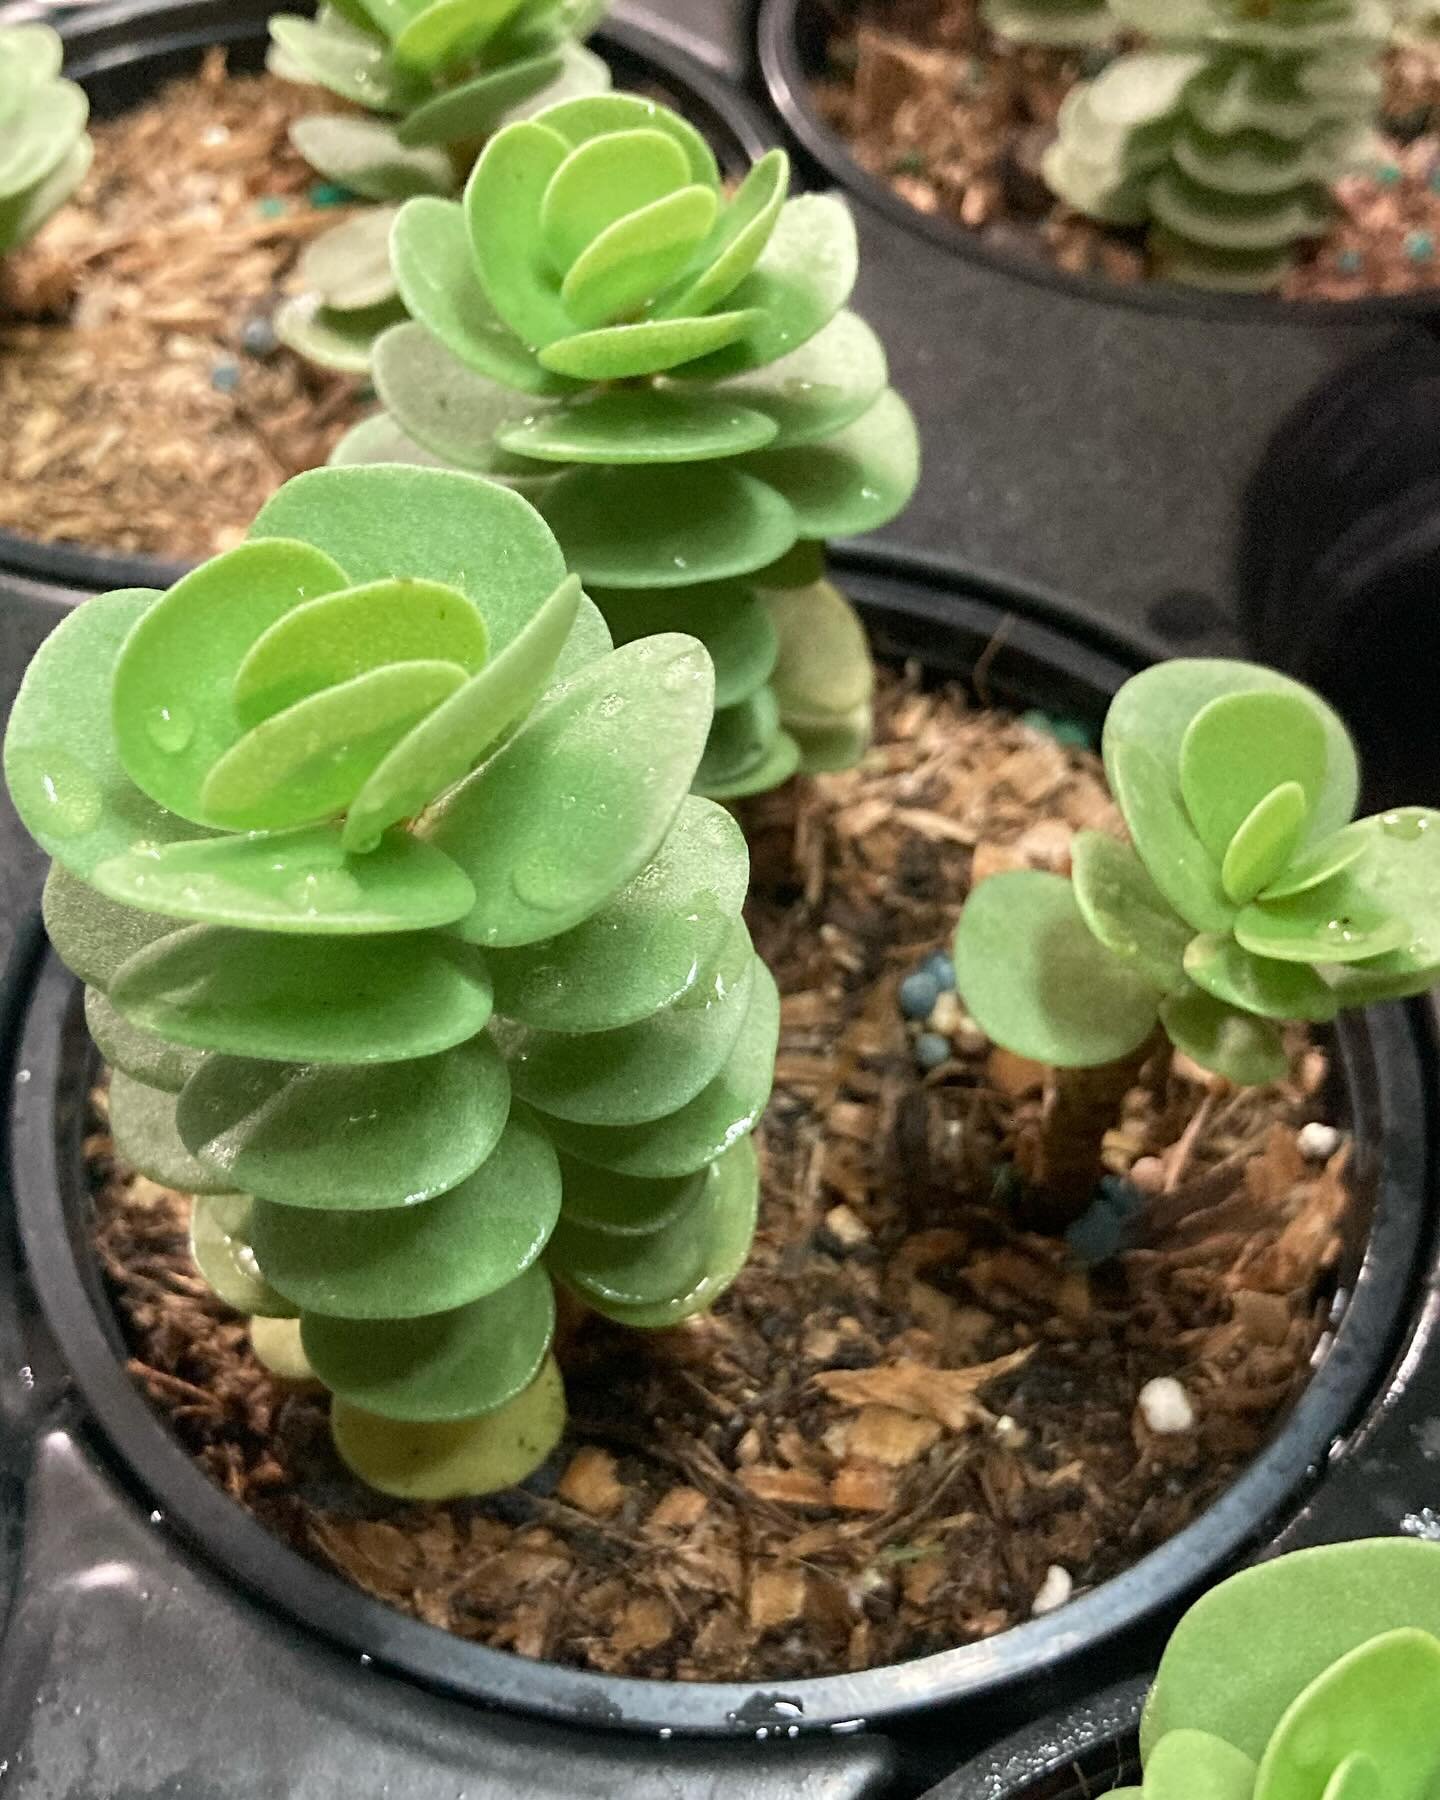 We&rsquo;ve got a ton of new plants from a recent plant truck!  We&rsquo;ve got some awesome looking Burro&rsquo;s Tails ($20 for 6&rdquo; pot), icy looking Haworthia ($6 each), some incredible looking Money&rsquo;s Tail cactus (6&rdquo; hanging bask